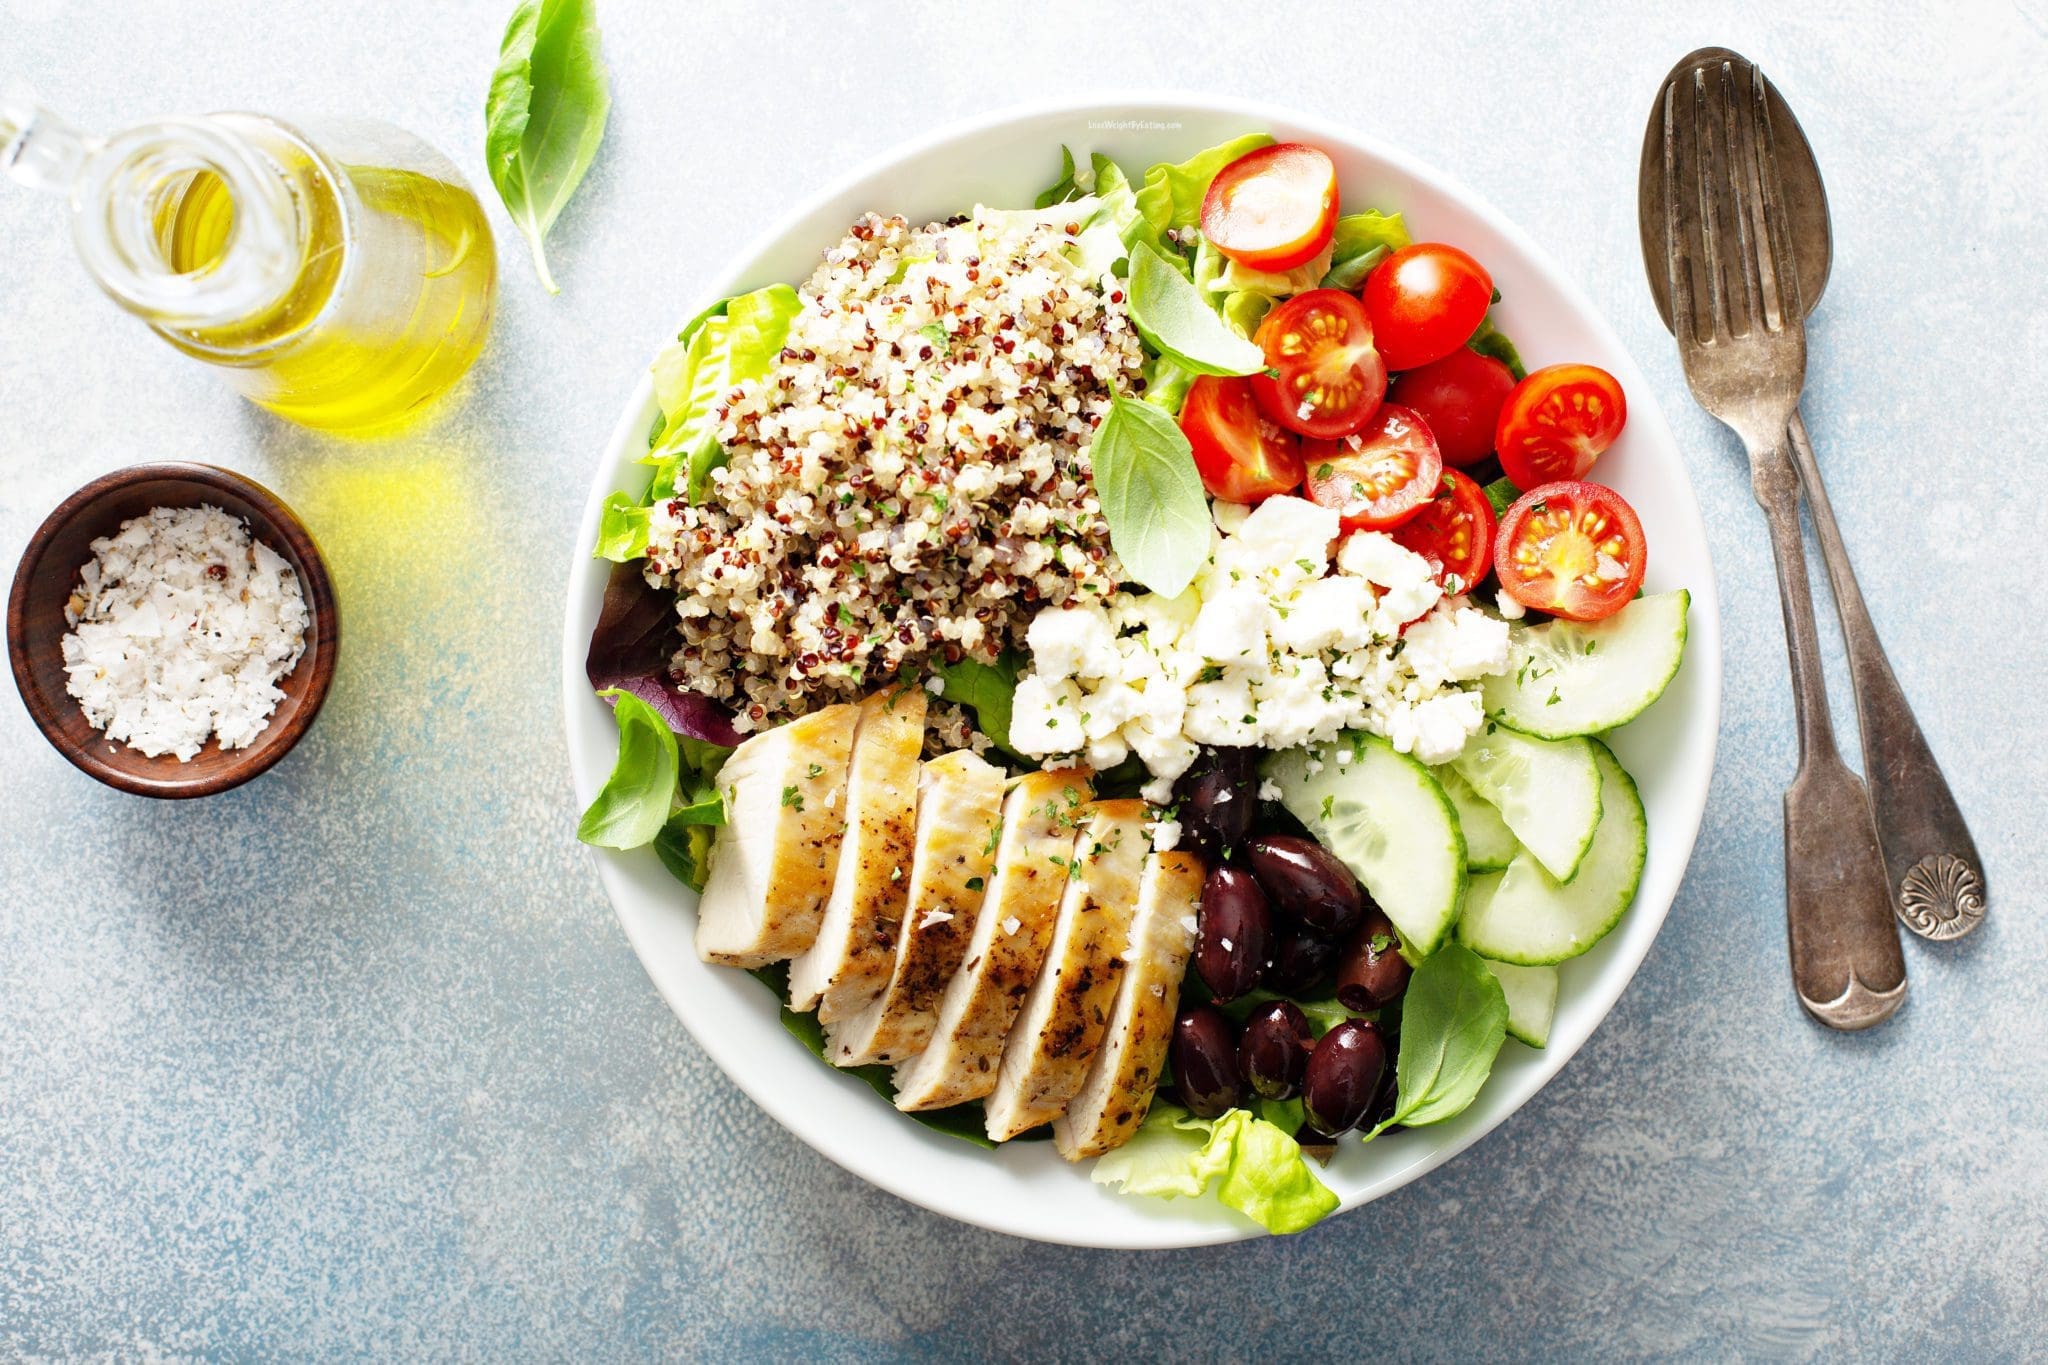 Low Calorie Greek Salad with Grilled Chicken - Lose Weight By Eating